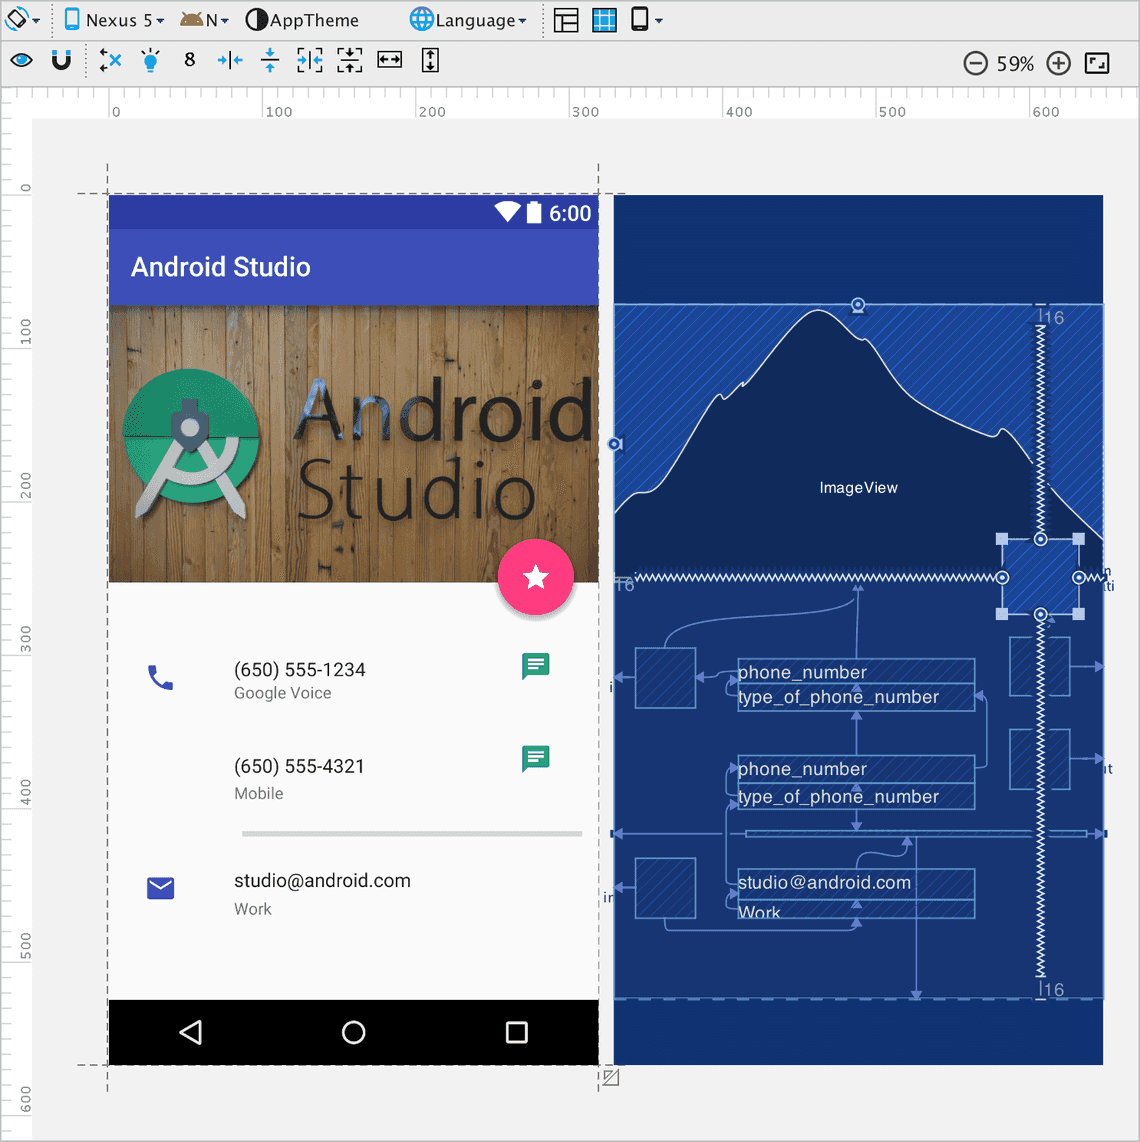 Introducing new ConstraintLayout Android Studio